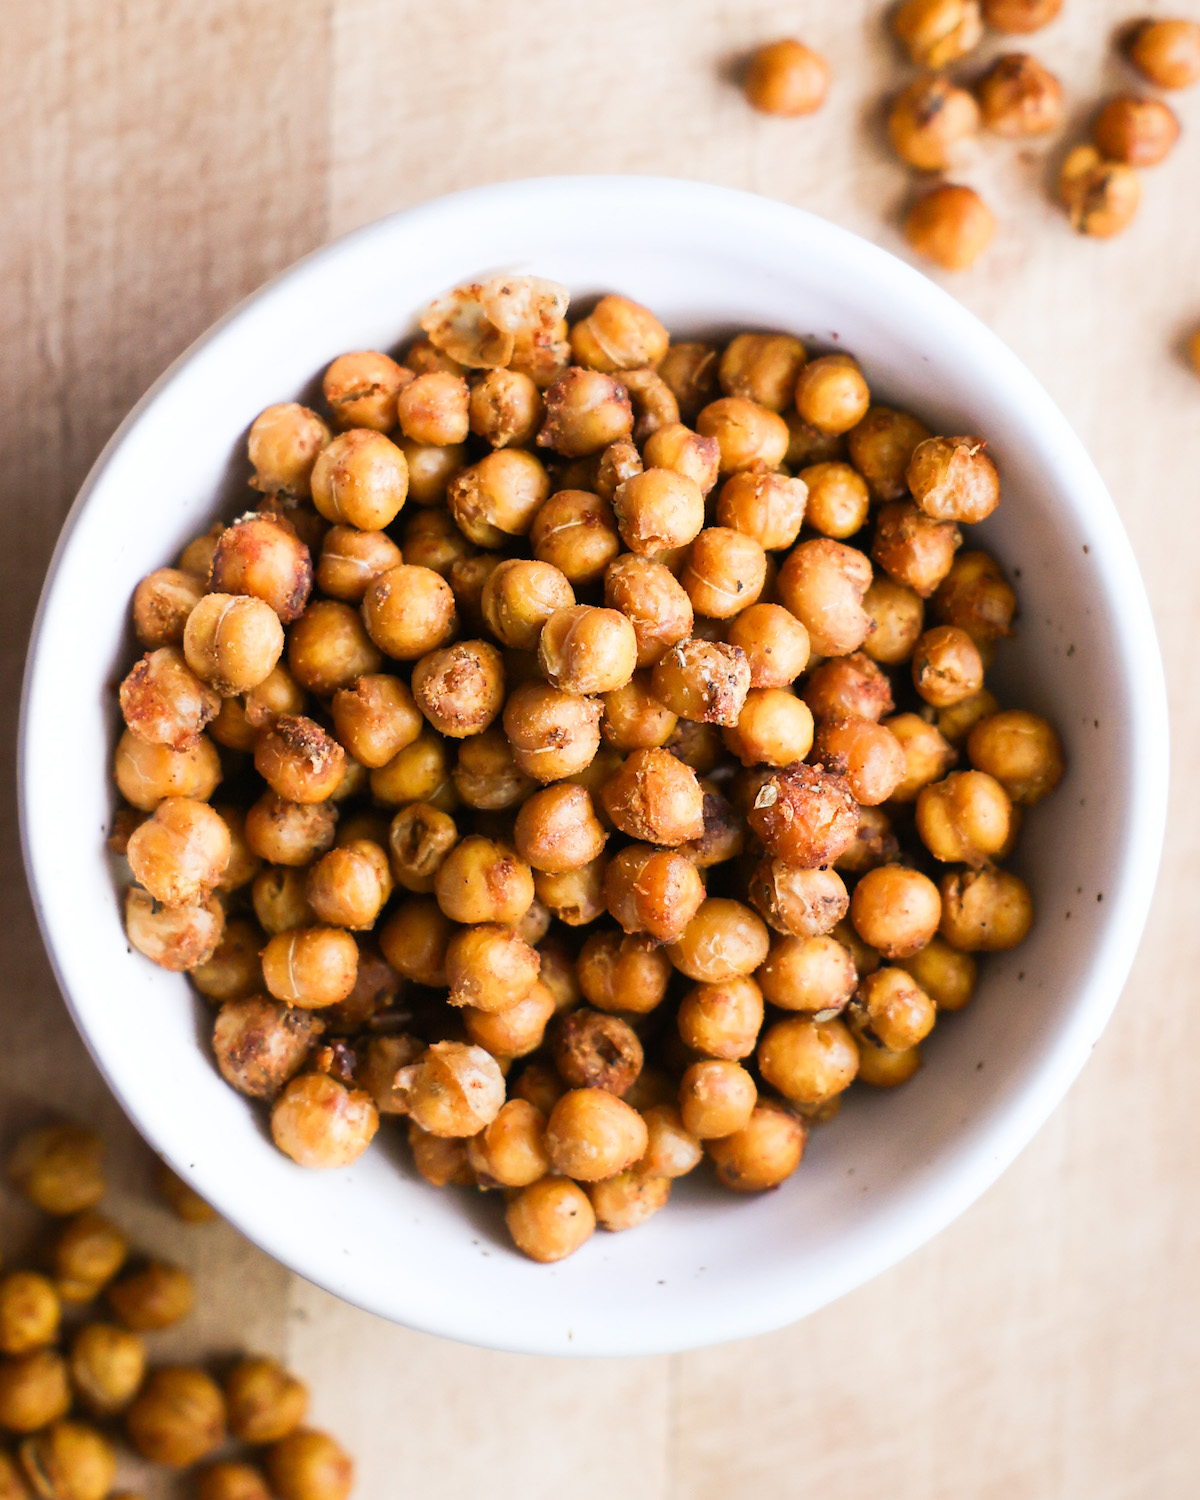 An up-close overhead shot of a white bowl of roasted chickpeas.